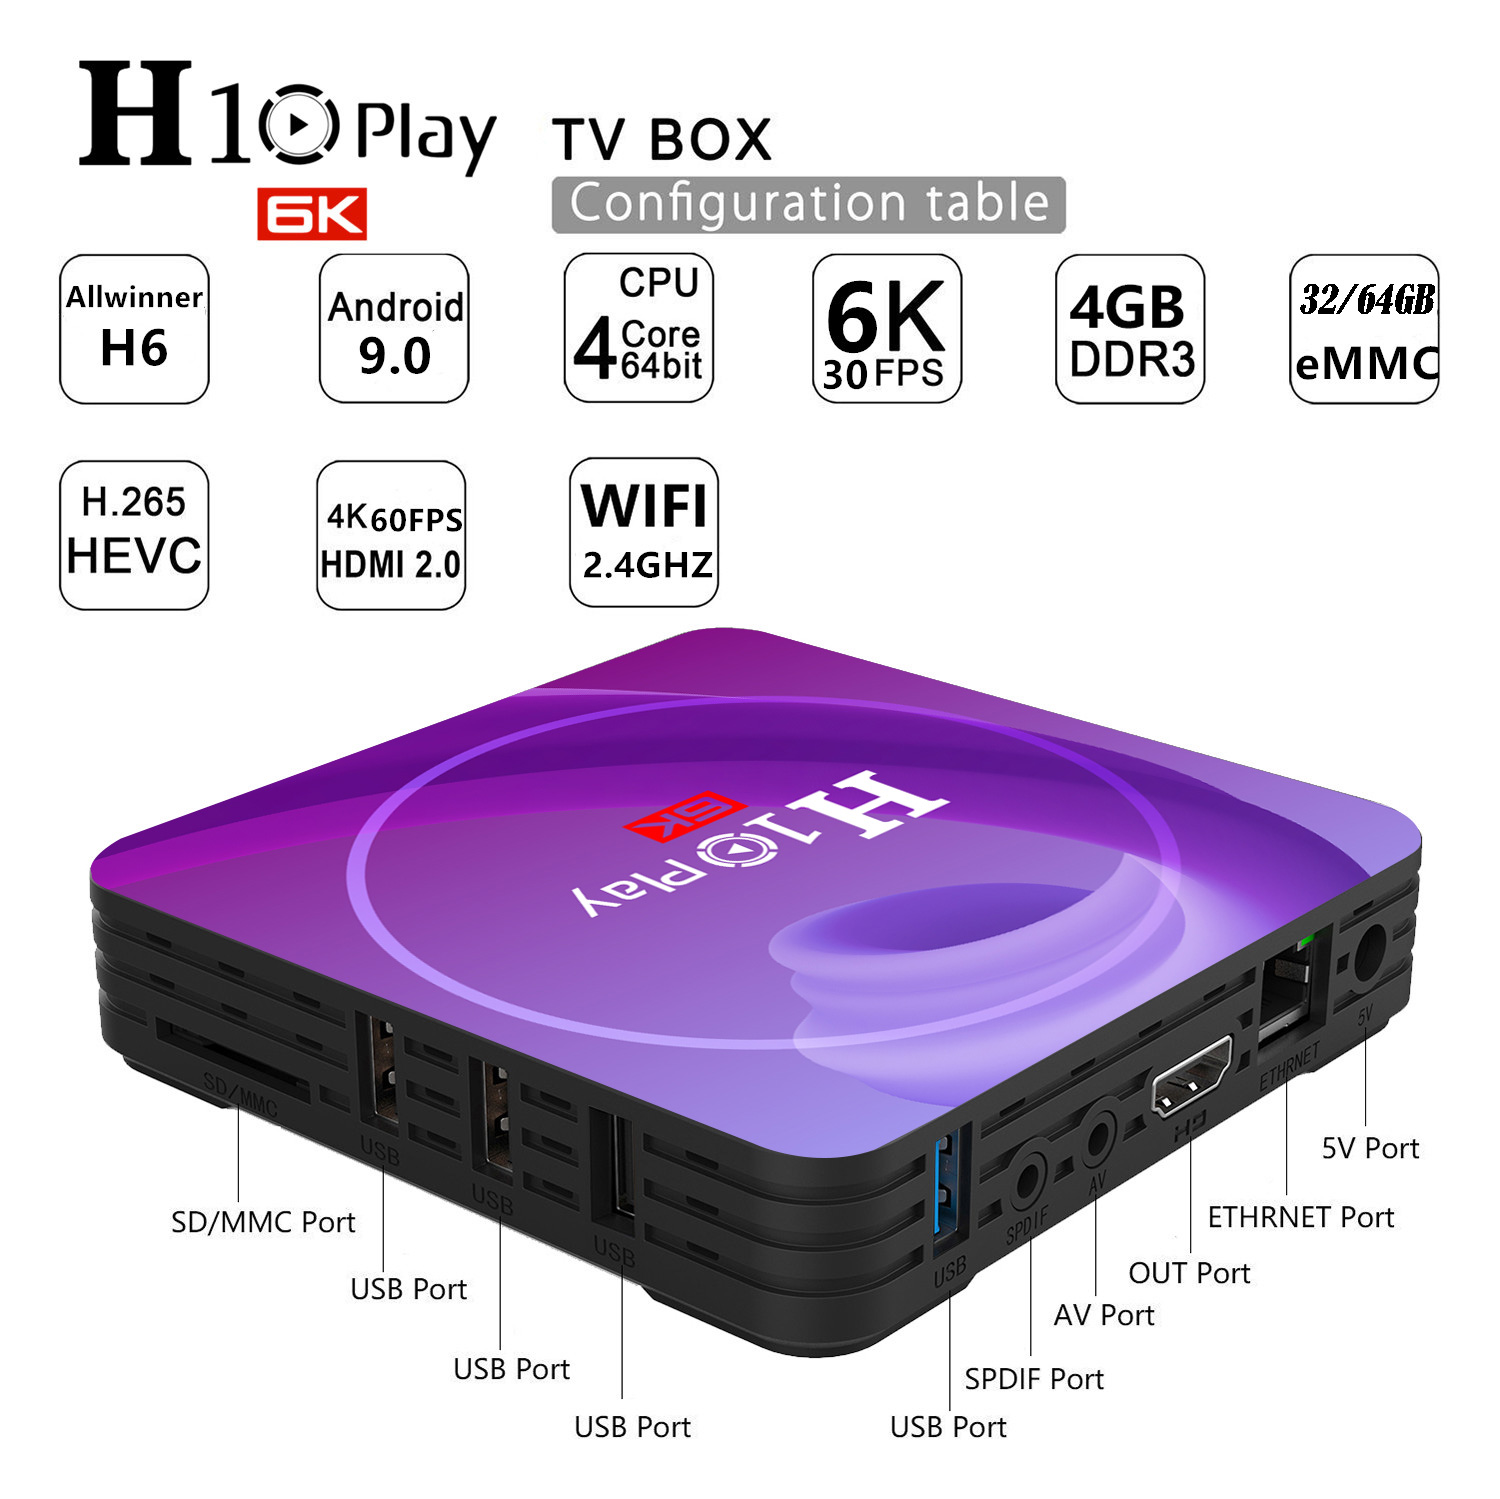 Allwinner H10 TV Box Hd Smart Network Player for Android 9.0 European plug